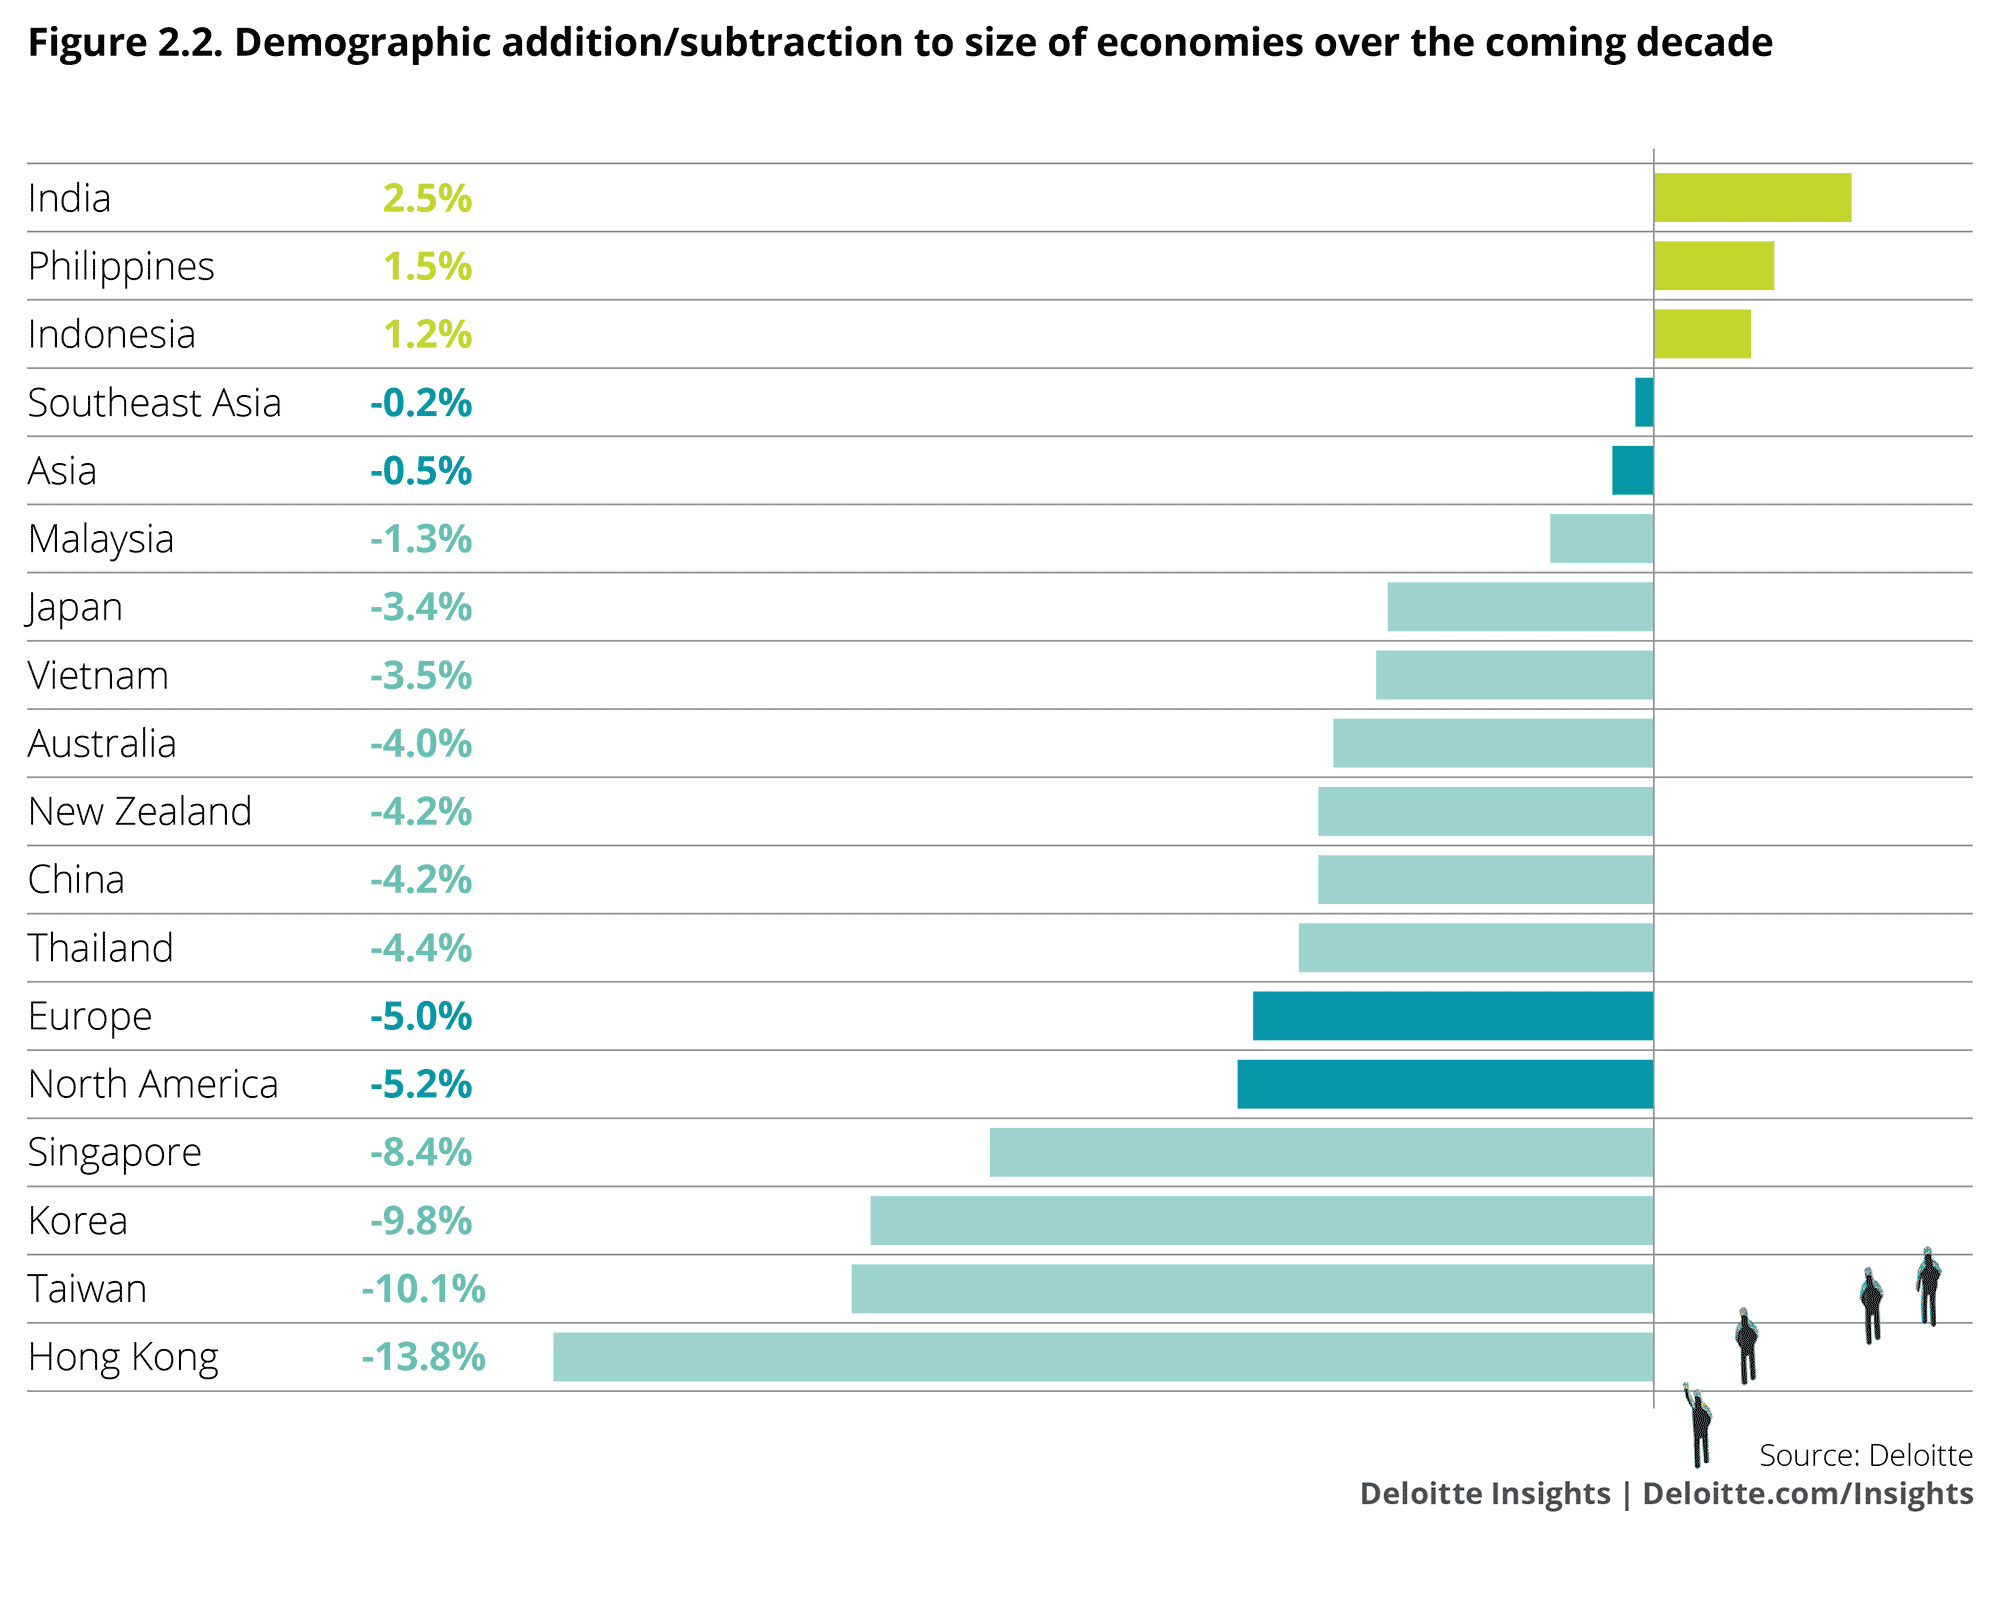 Demographic addition/subtraction to size of economies over the coming decade